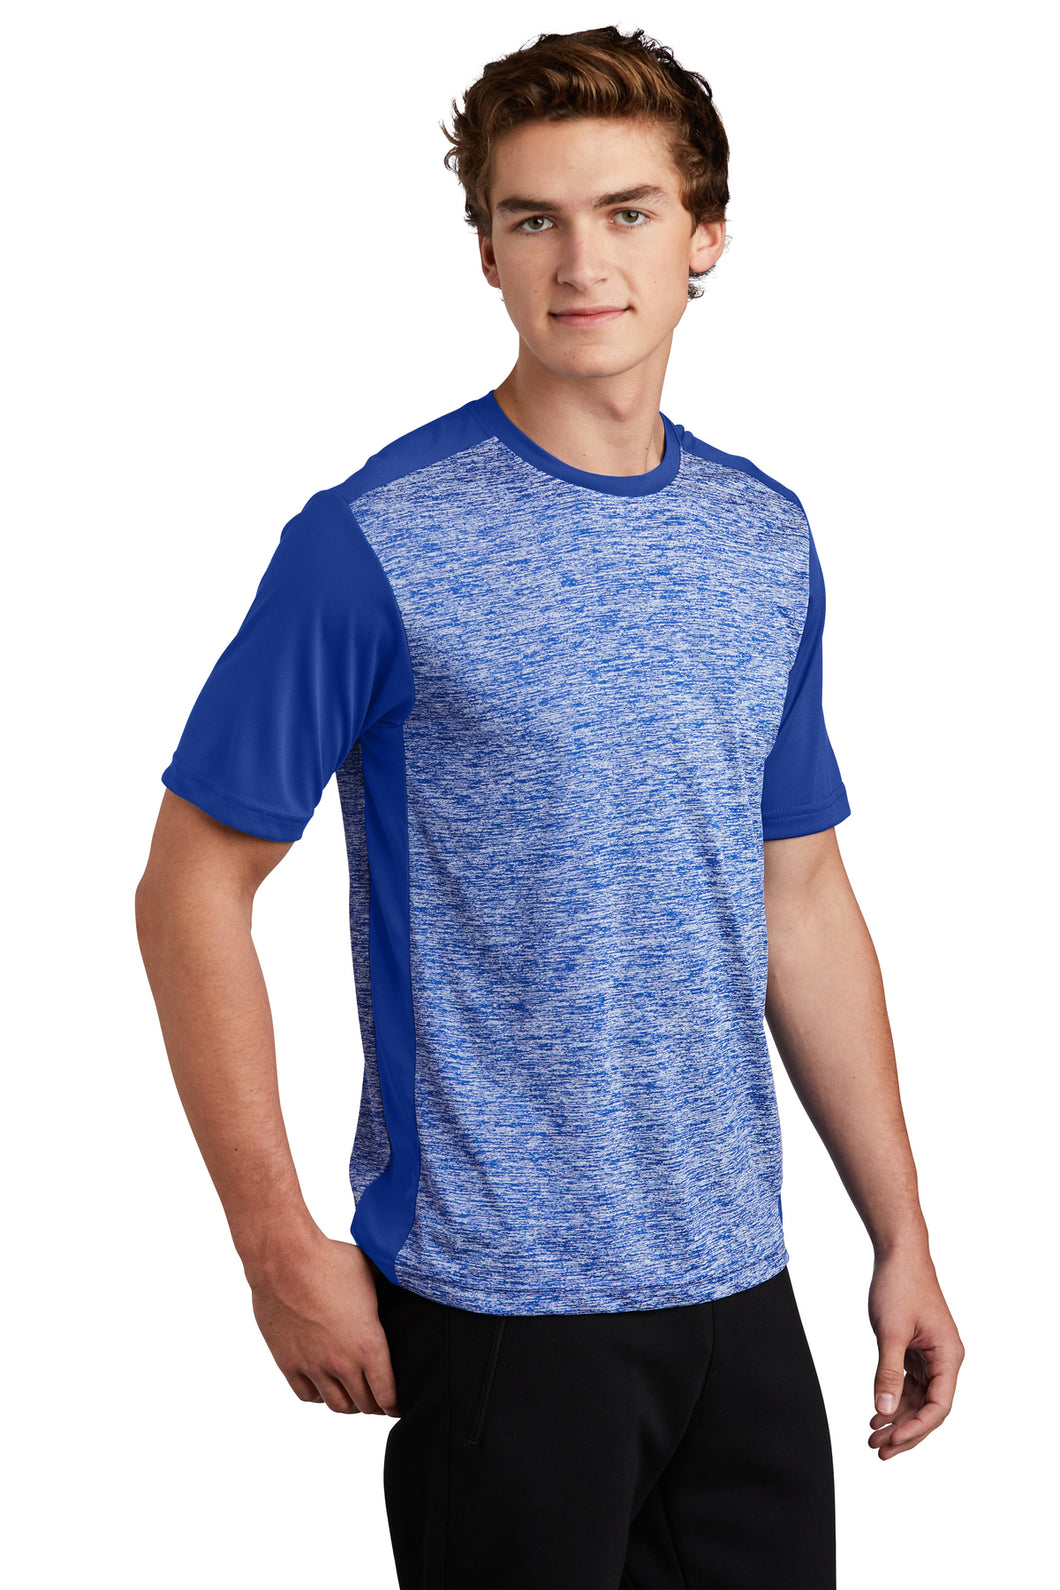 Laser Alley Performance Top - Royal